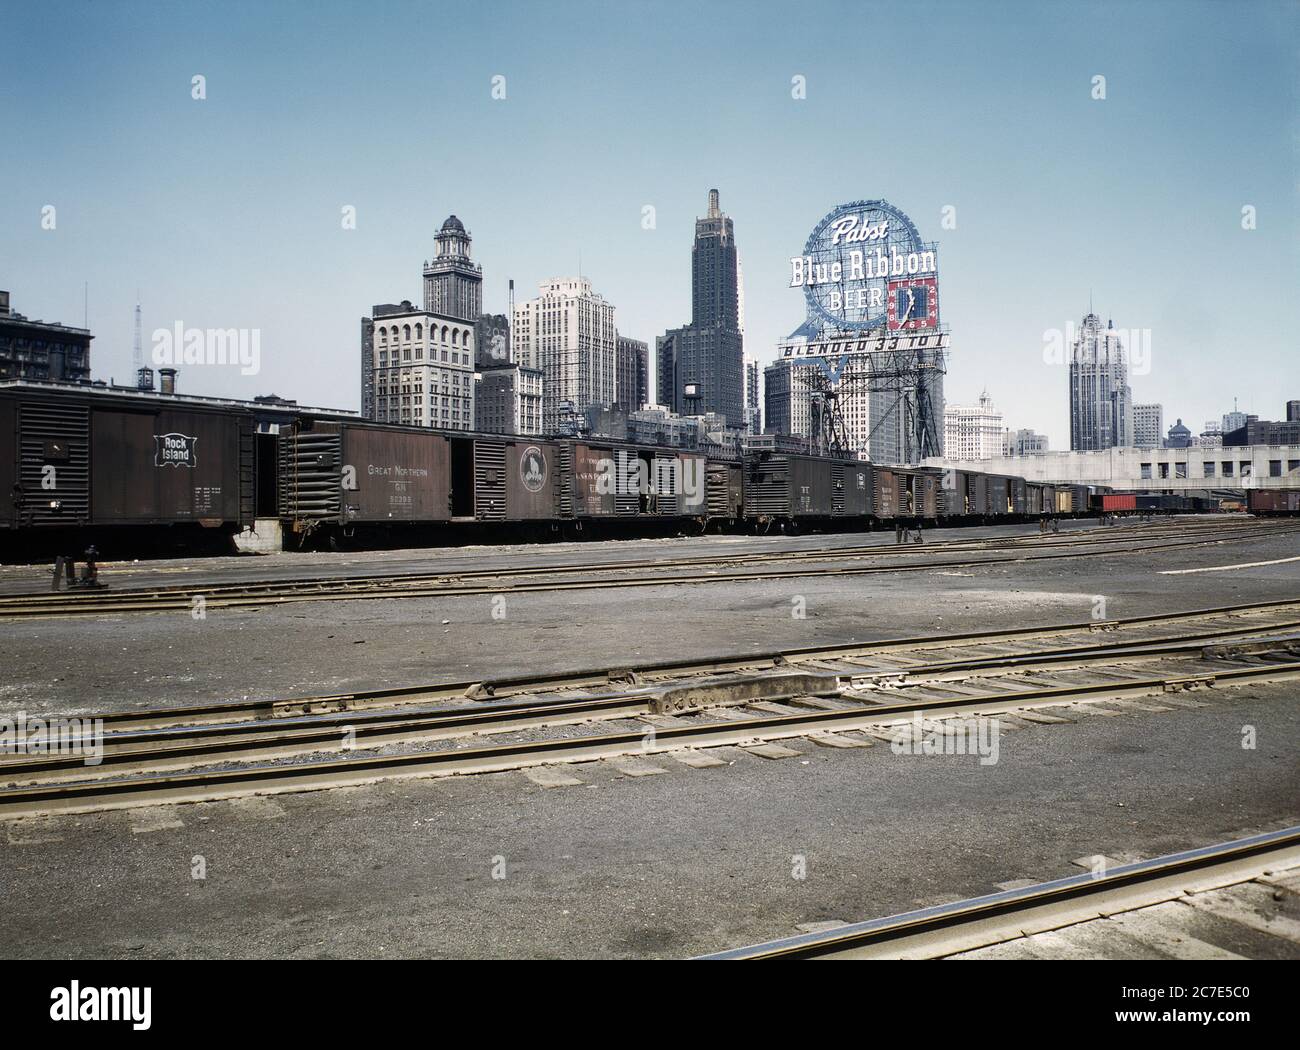 General view of part of South Water Street Illinois Central Railroad Freight Terminal, Chicago, Illinois, USA, Jack Delano, U.S. Office of War Information, April 1943 Stock Photo